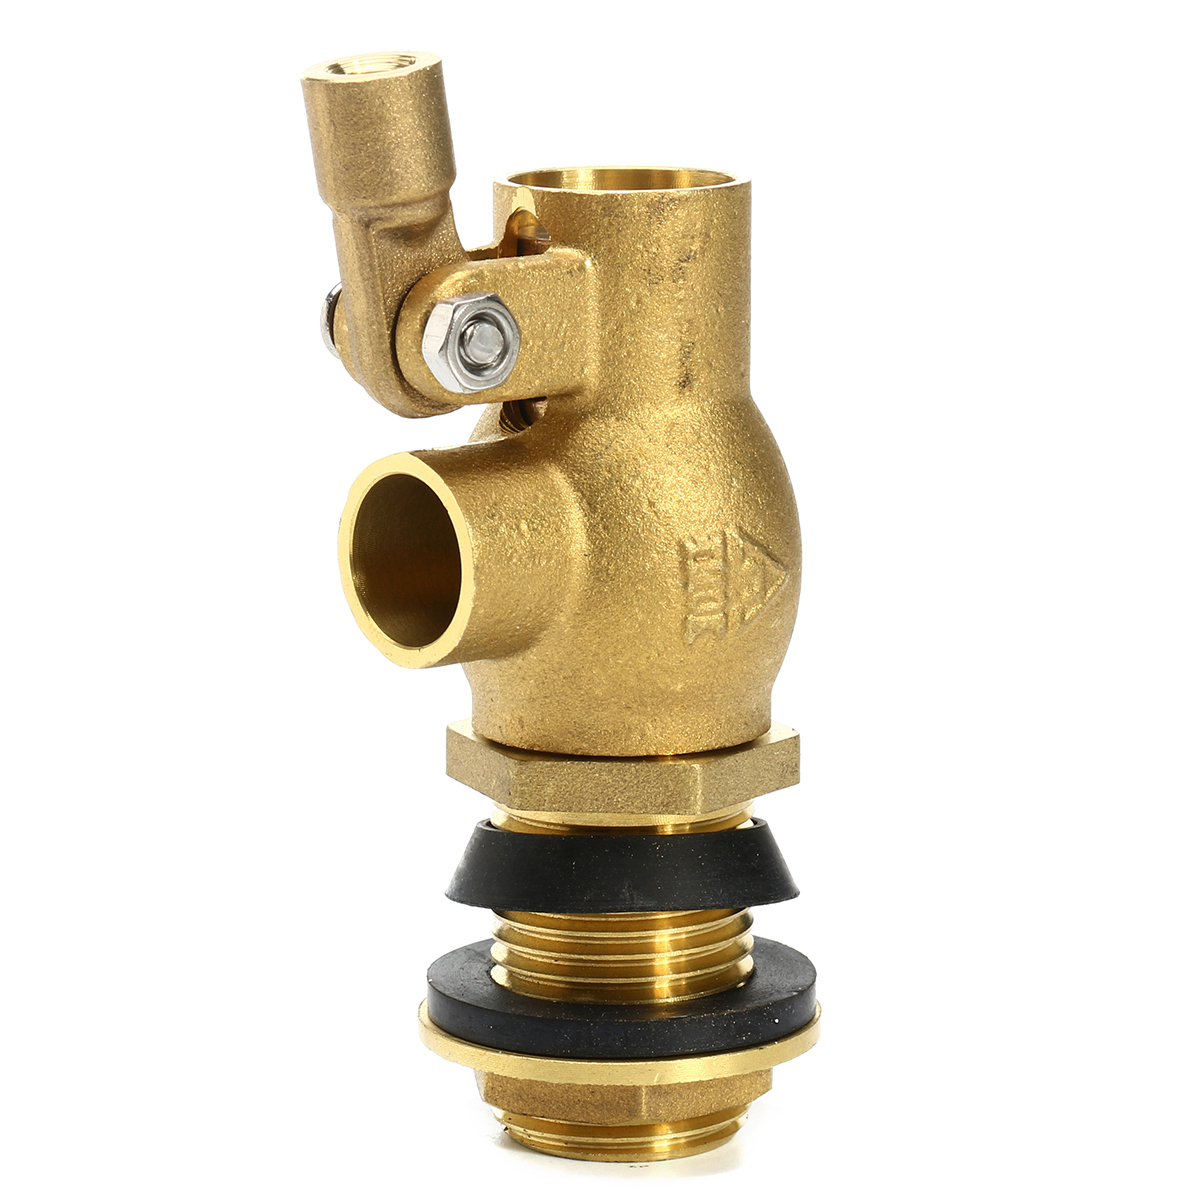 1-Inch-Float-Valve-Brass-Valve-Stainless-Steel-Water-Trough-Automatic-Cattle-Bowl-Tank-1350658